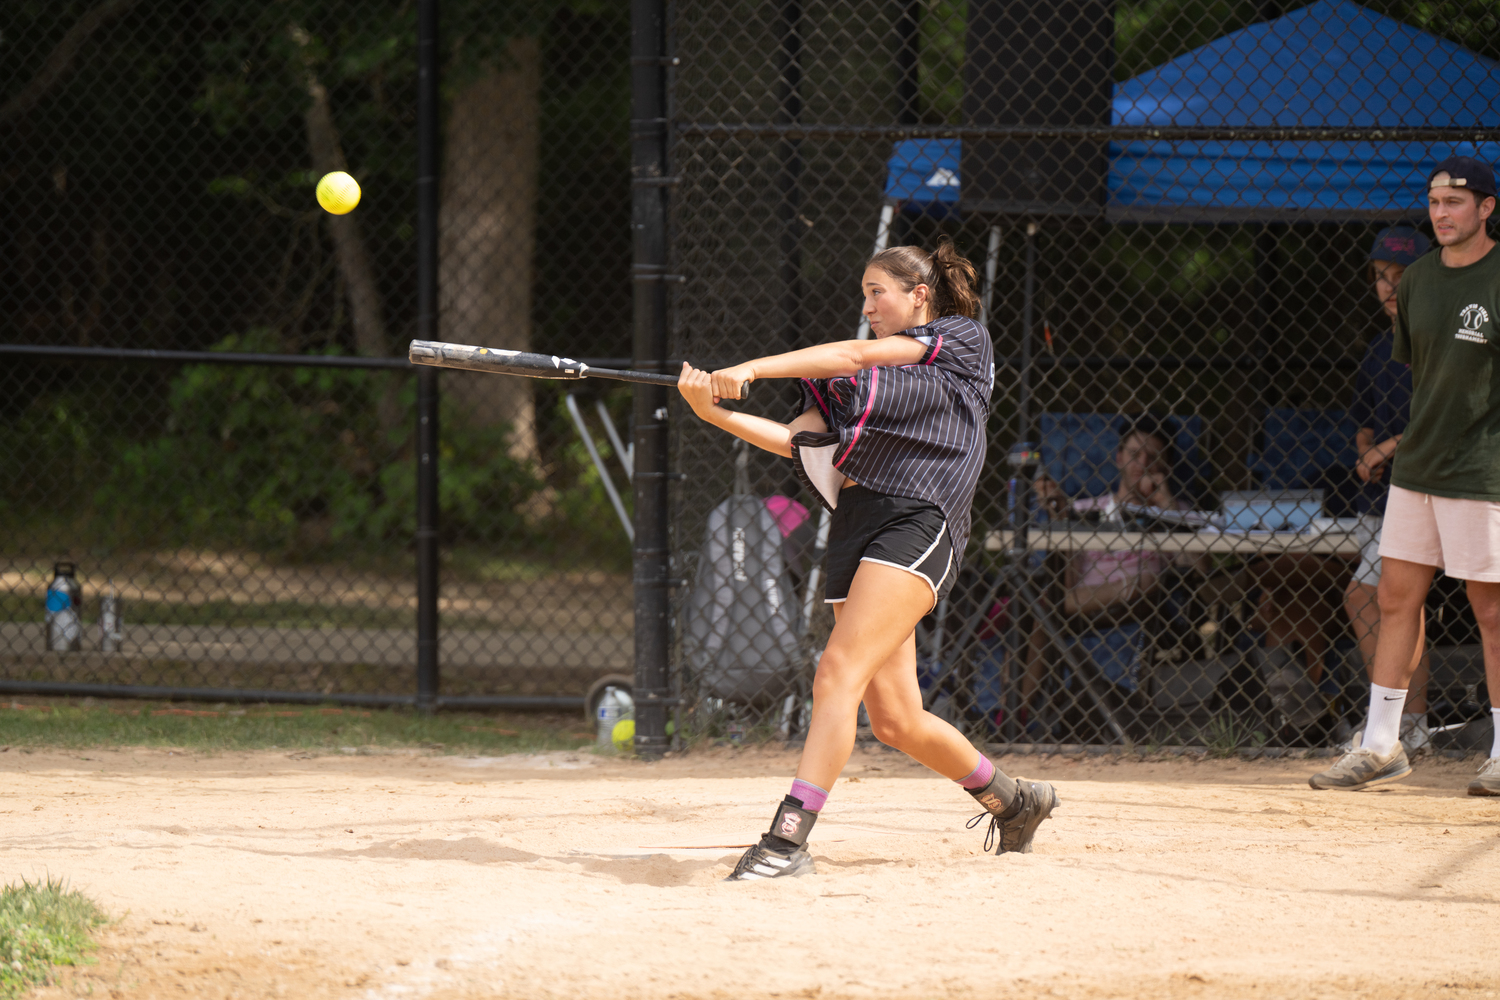 Emma Terry makes good contact with a pitch.  RON ESPOSITO